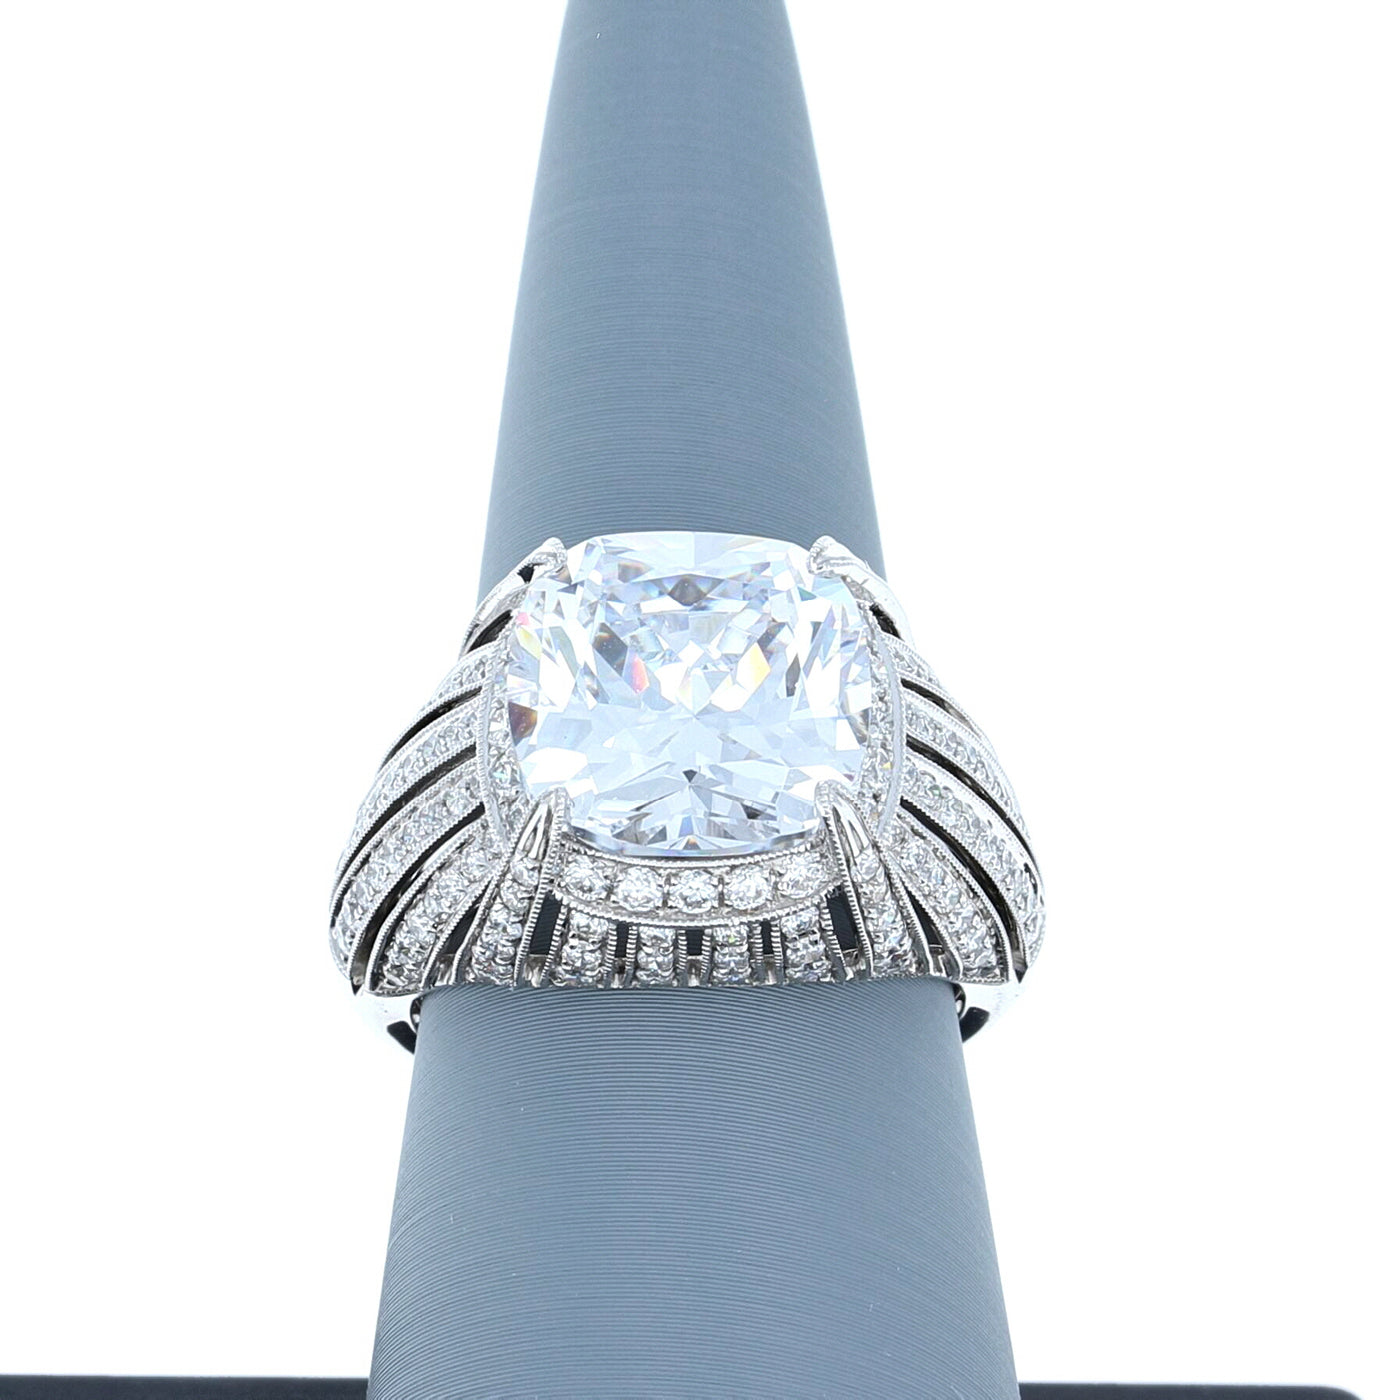 Apparel & Accessories > Jewelry > Rings Diamond Ring in 18K White Gold for 11mm Cushion Cut Center Stone Pierce Custom Jewelers